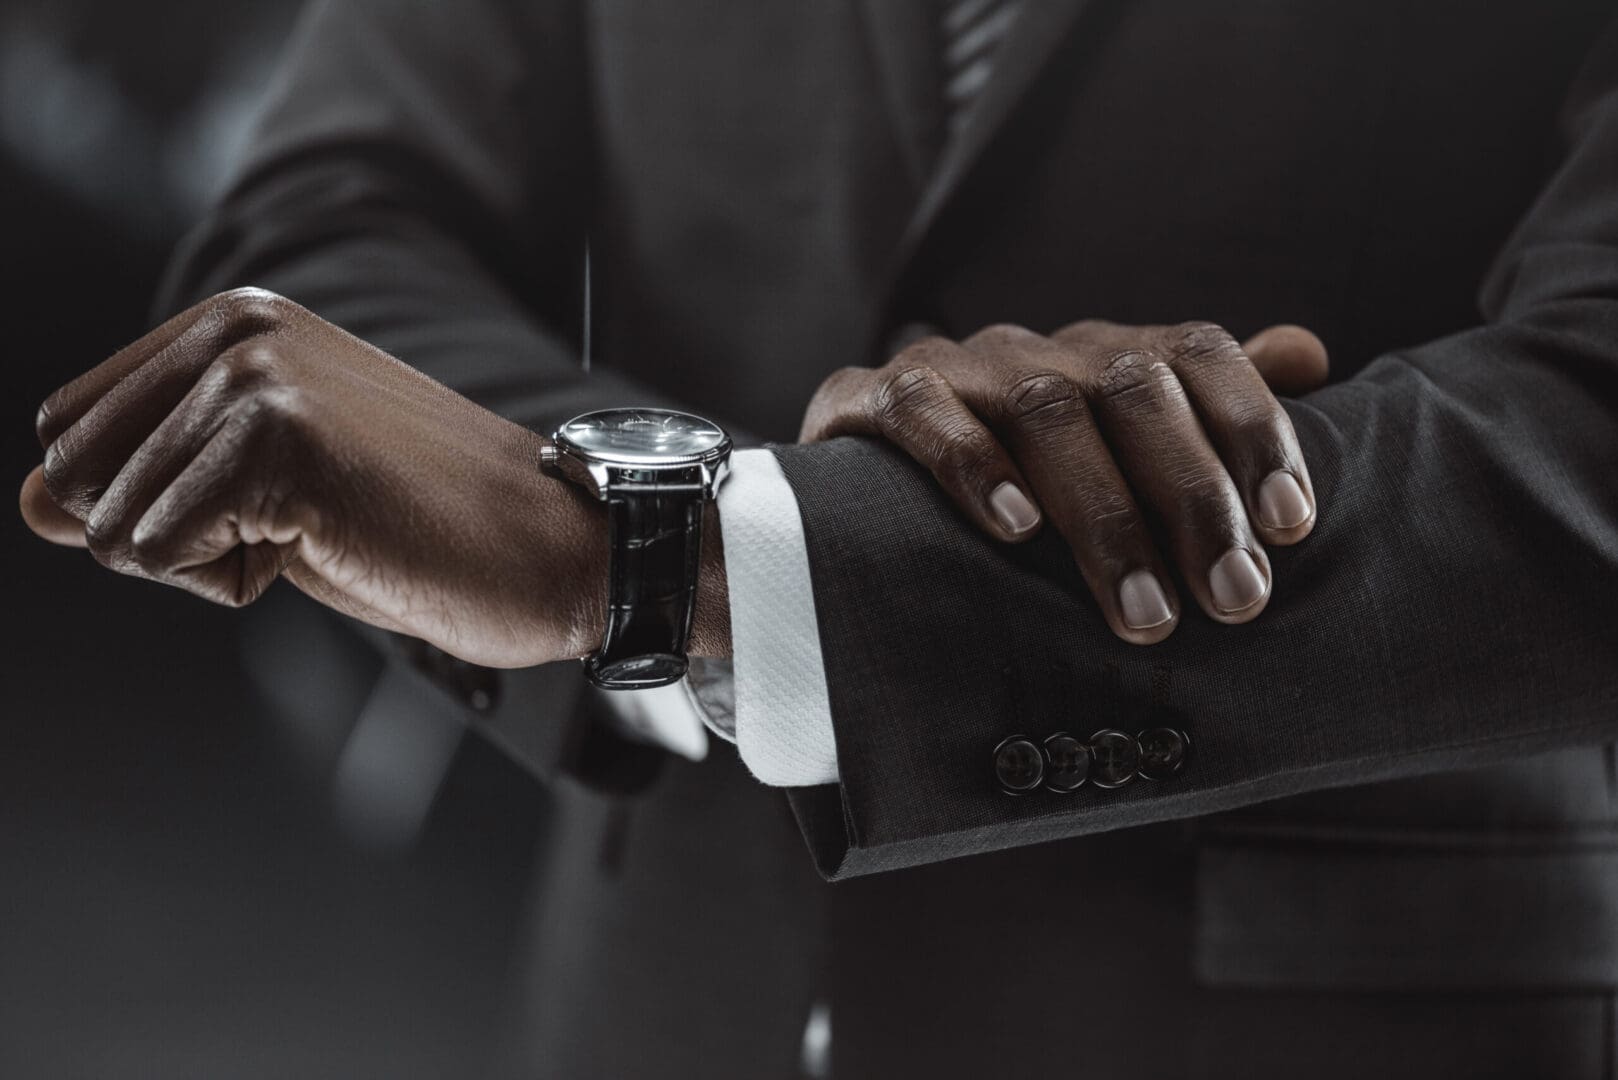 A person wearing a watch and holding a laptop